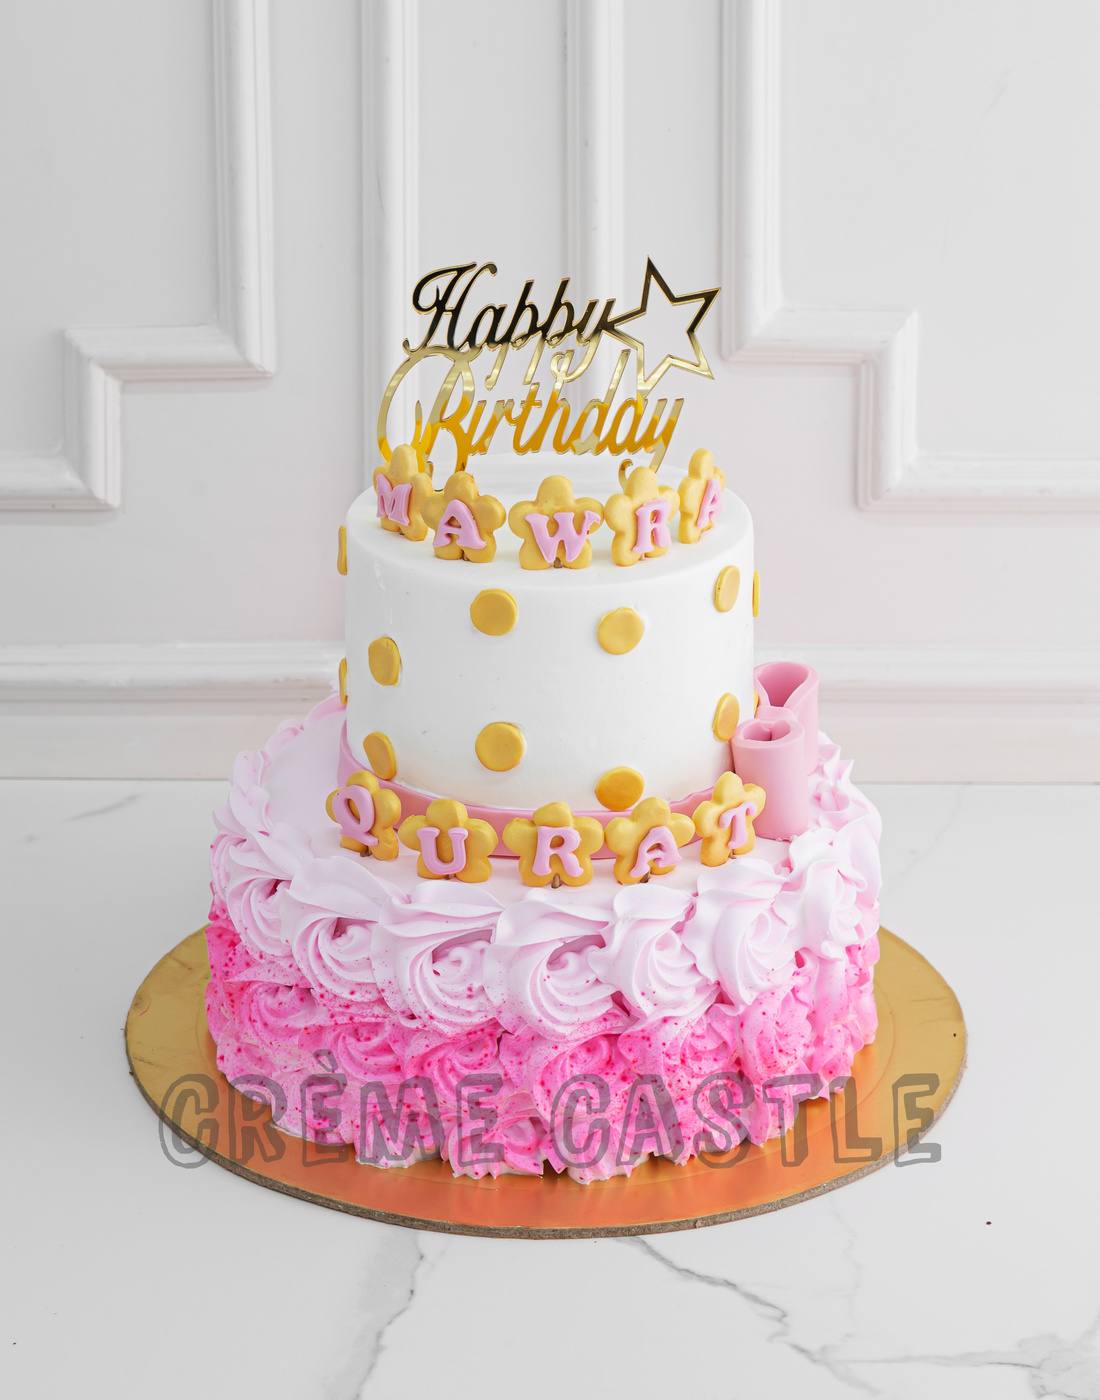 Pink Gold Double Tier Cake - Creme Castle